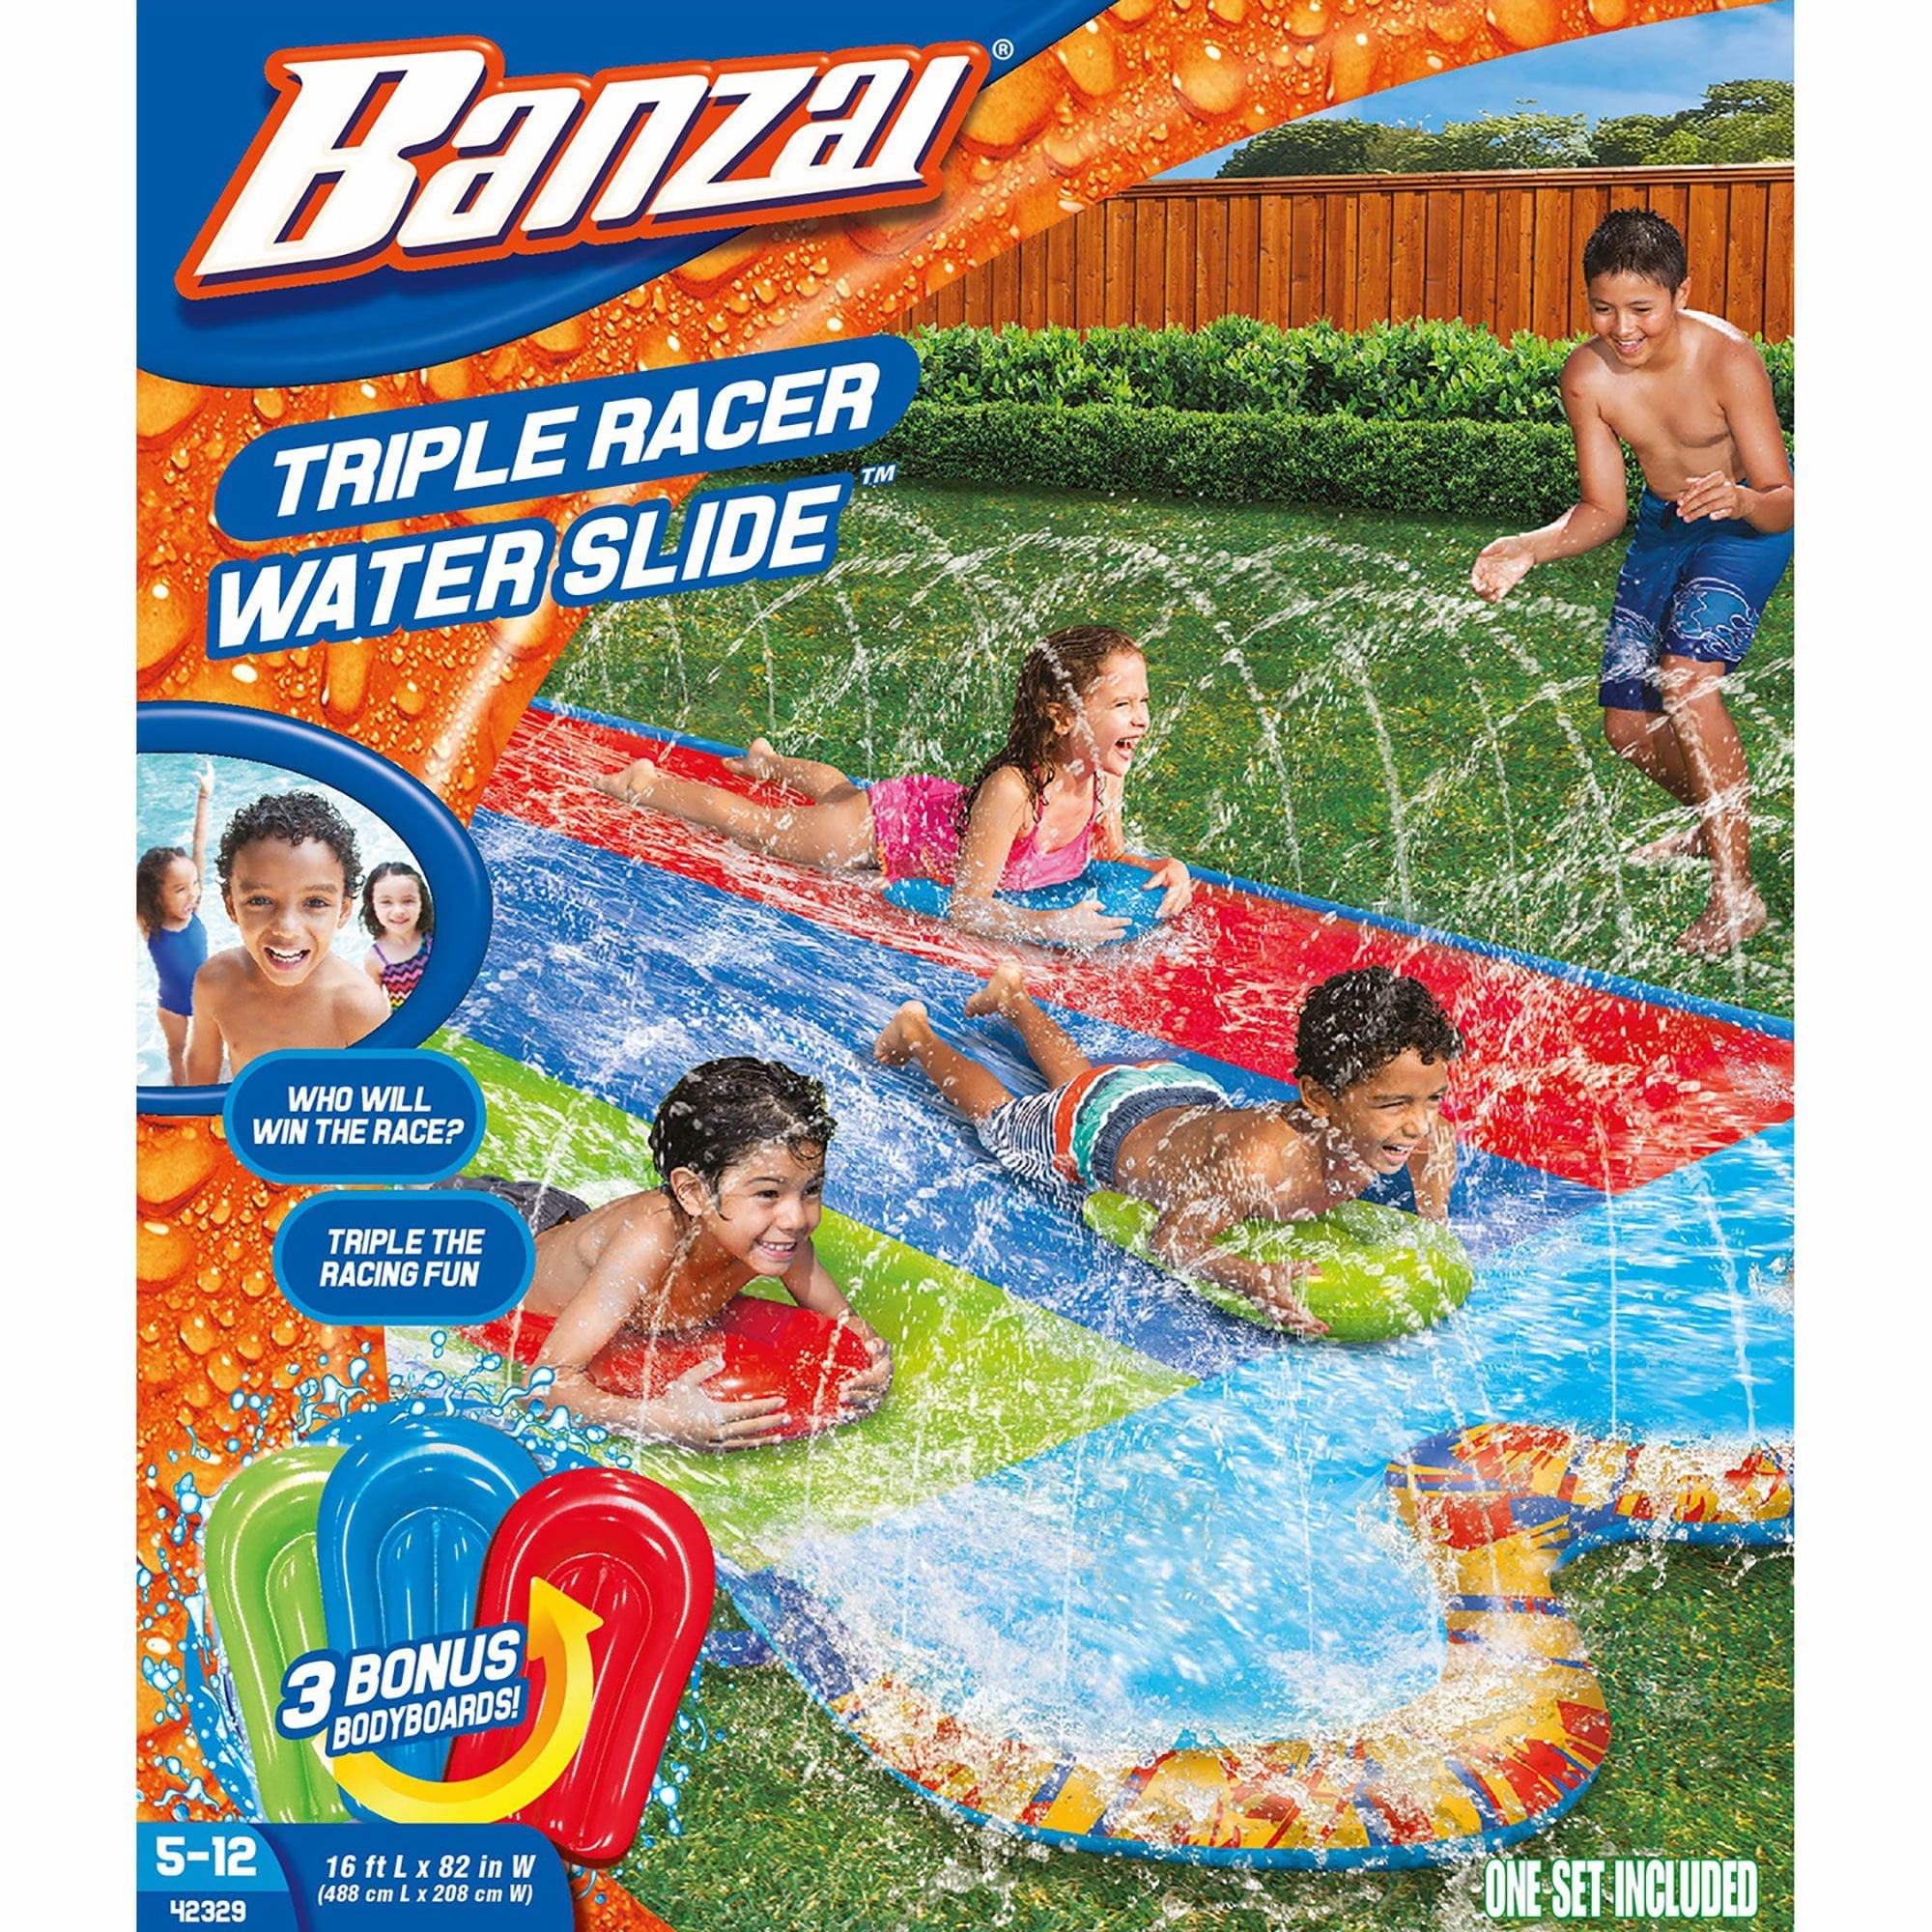 16.5 Feet Long Slide Banzai Triple Racer with Boogie Boards Included.